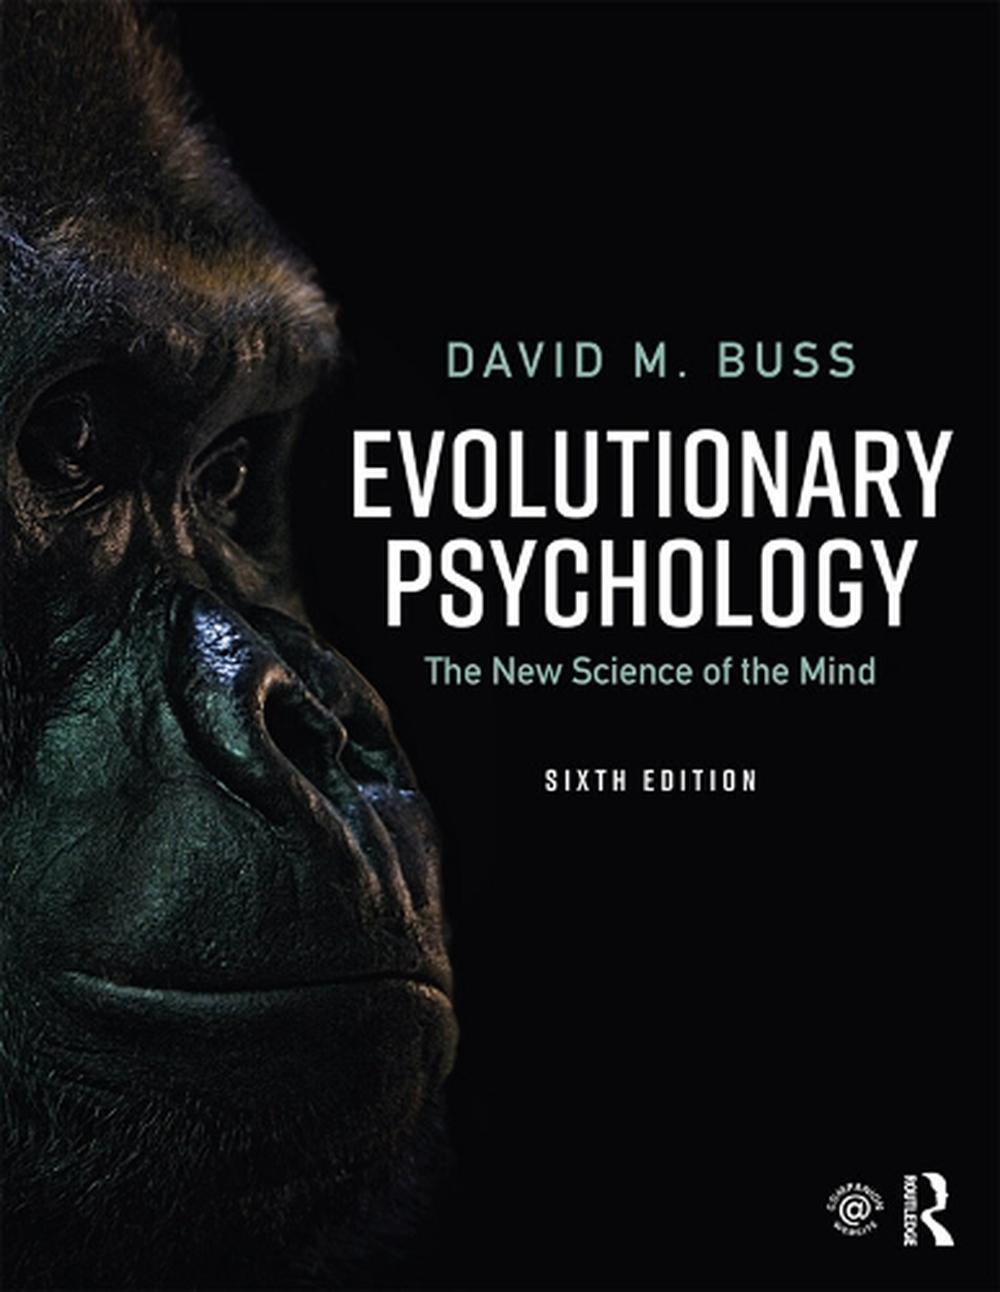 Evolutionary Psychology The New Science of the Mind by David M. Buss